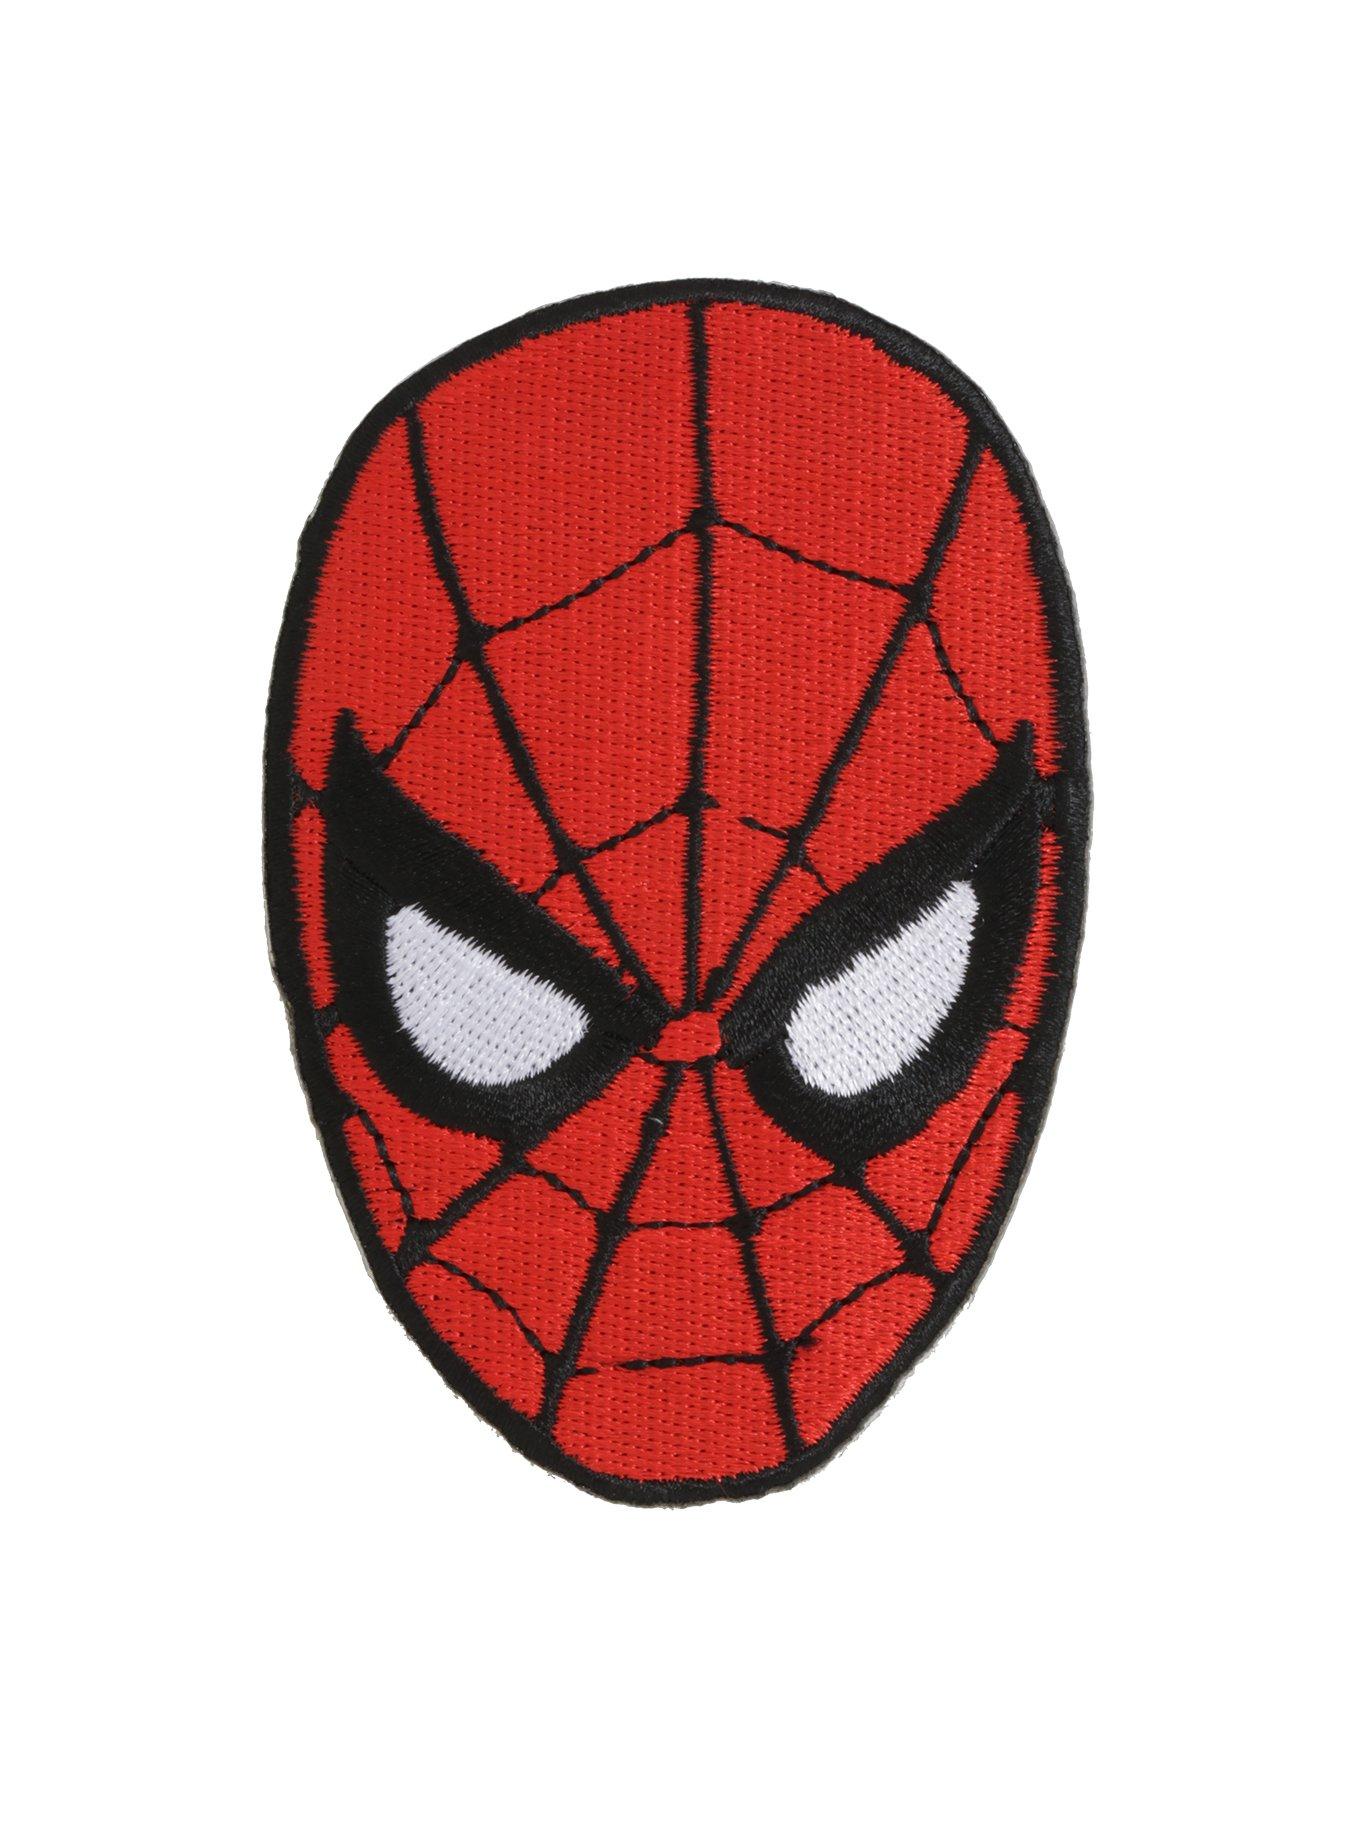 Generic Marvel Spiderman Iron Man Ironing Patches Hot Transfers